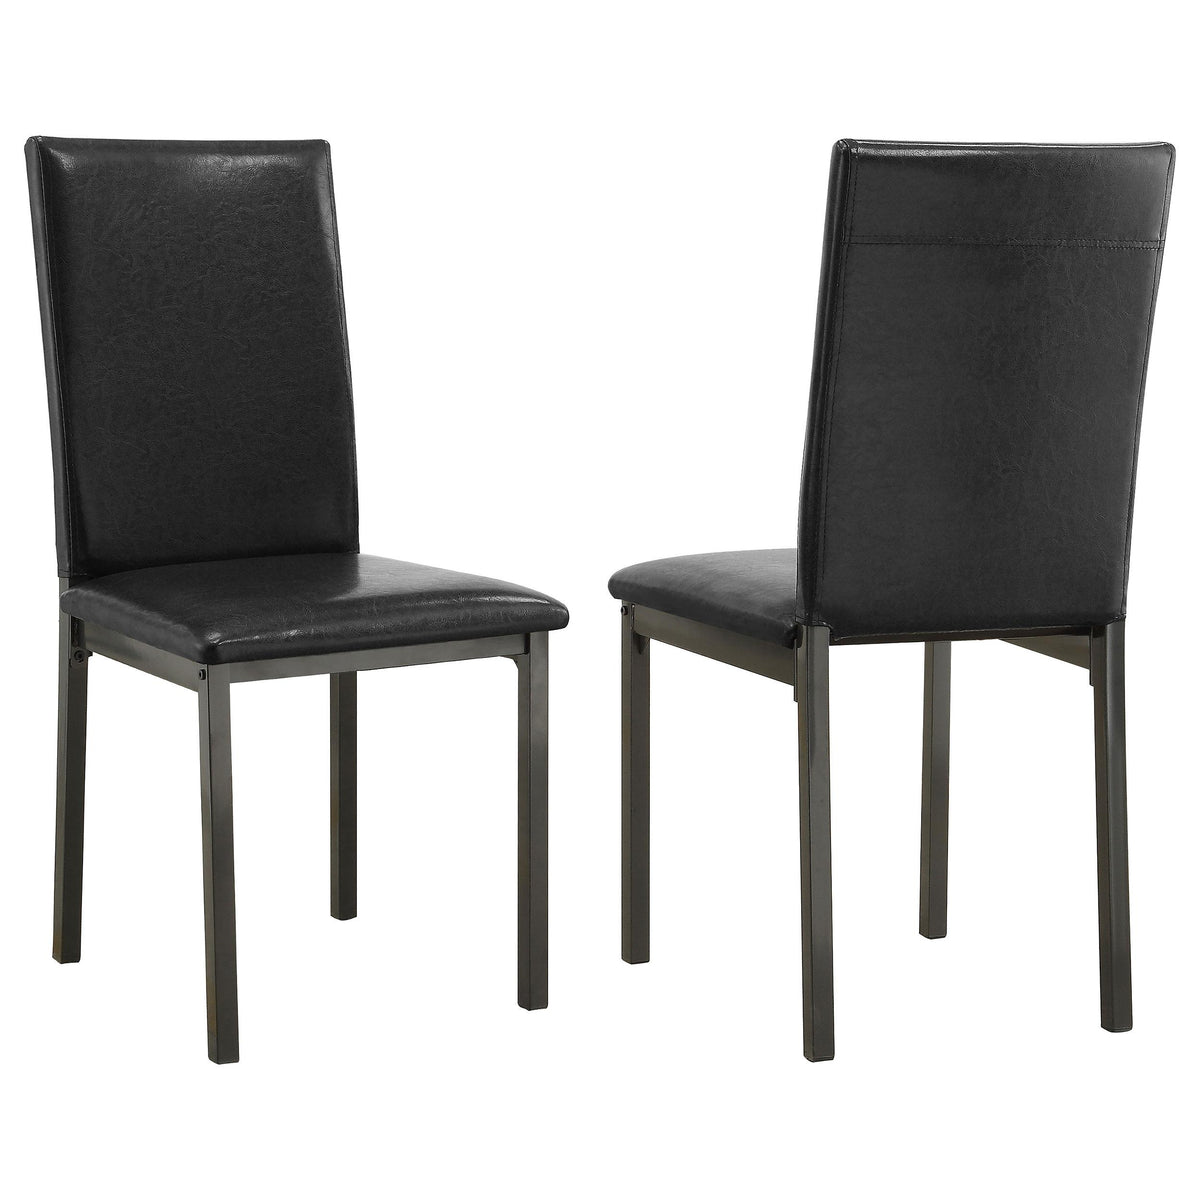 Garza Upholstered Dining Chairs Black (Set of 2)  Las Vegas Furniture Stores